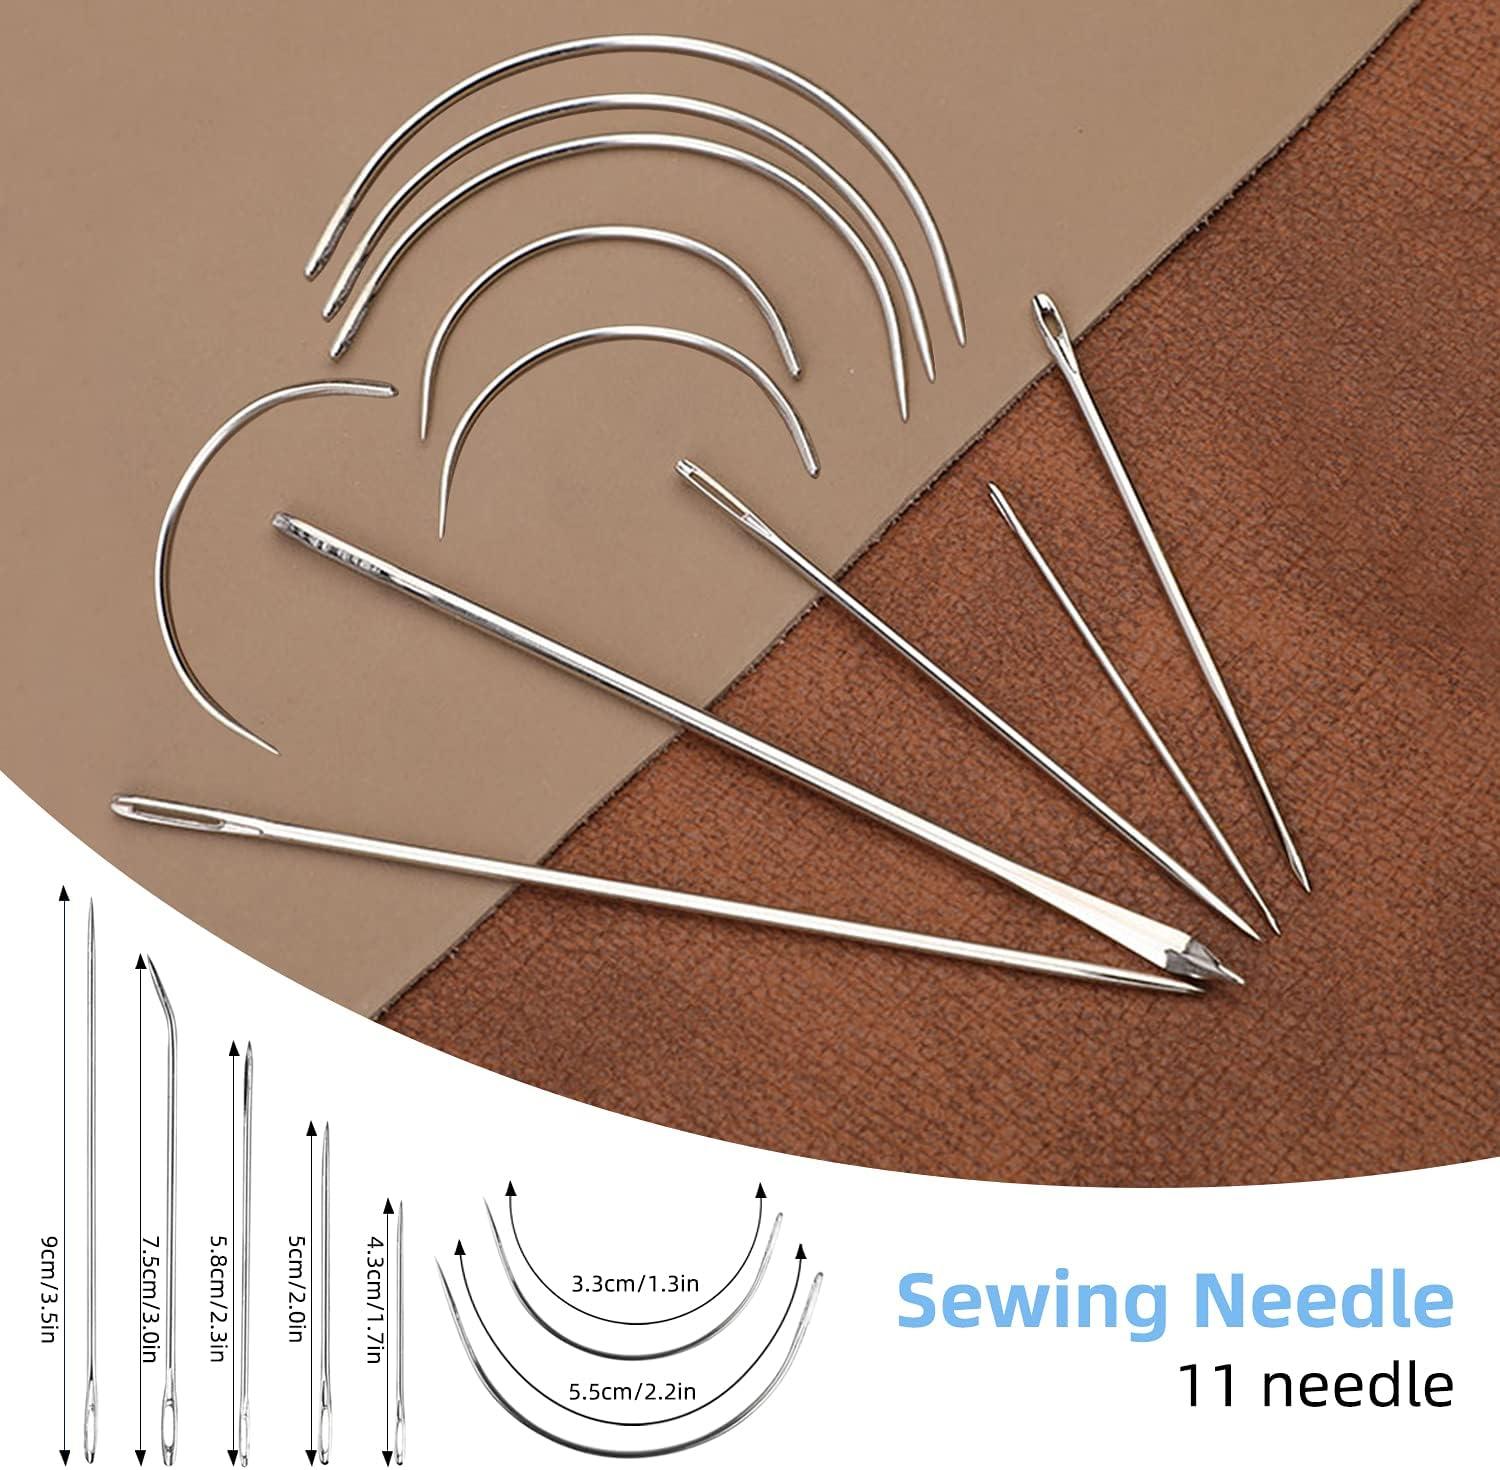 Sewing Awl Thread Fabrics Process Stitching Canvas Repair Tools DIY Leather  No Spool device